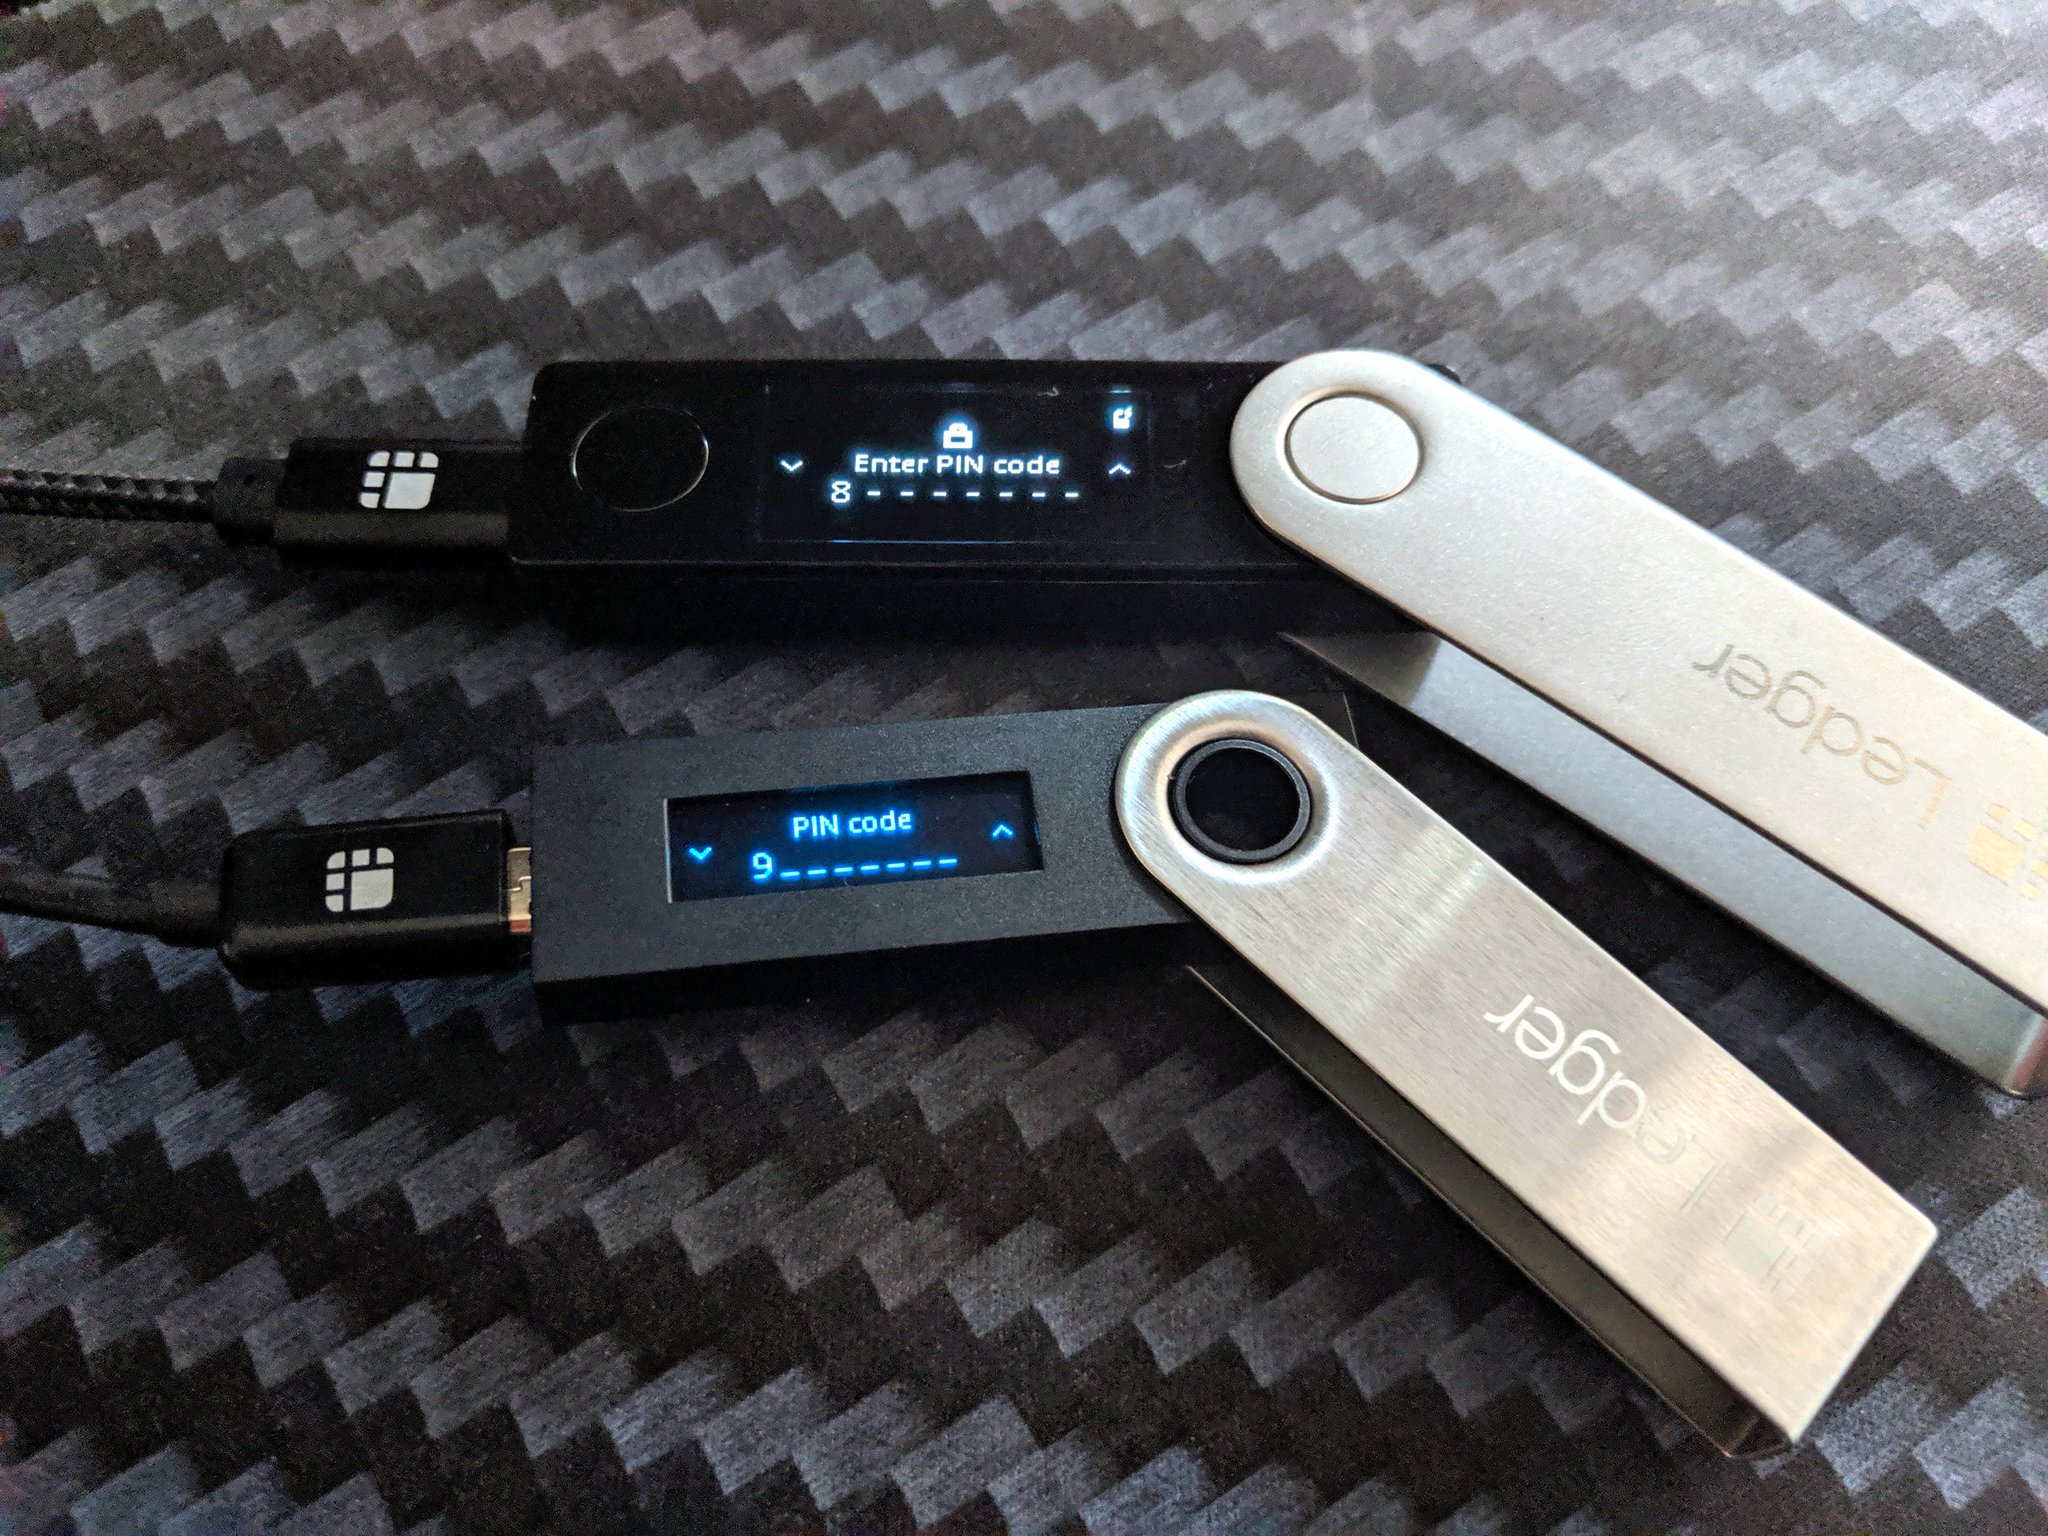 “Good first impressions of the @Ledger Nano X